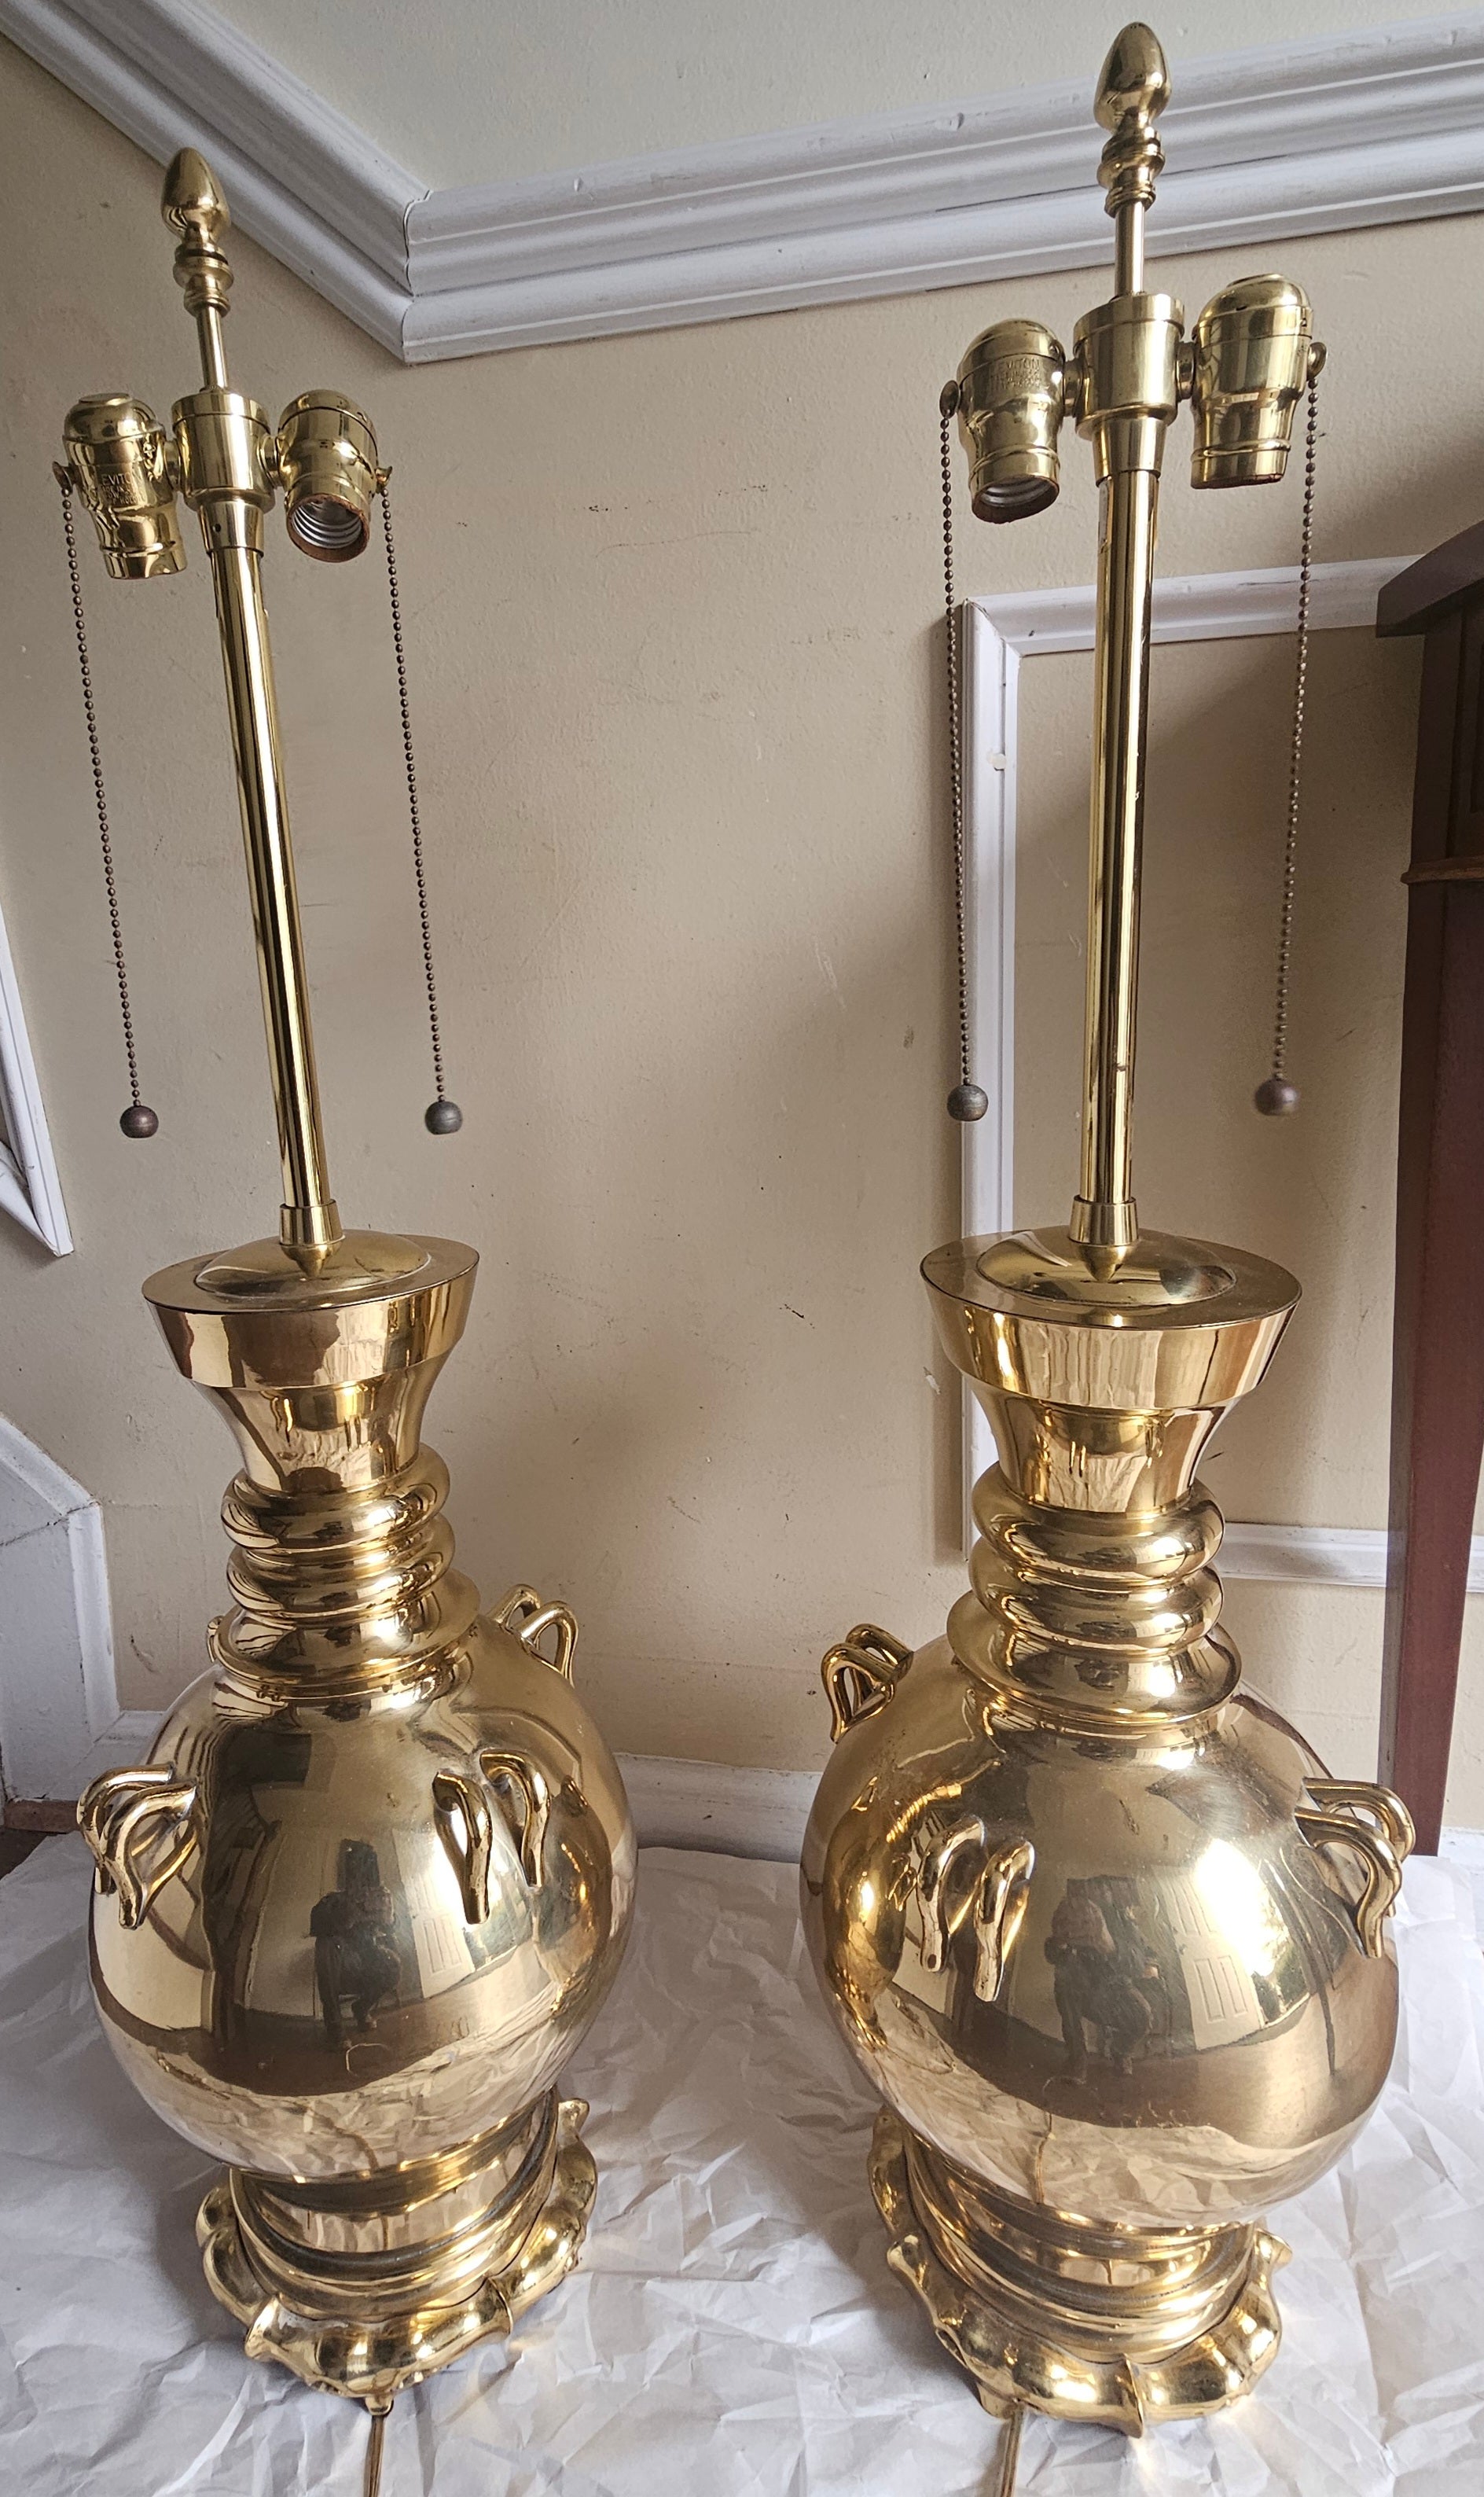 An exquisite Pair of Marbro Lamp Company polished brass table lamp 8s great vintage condition. Measure 9